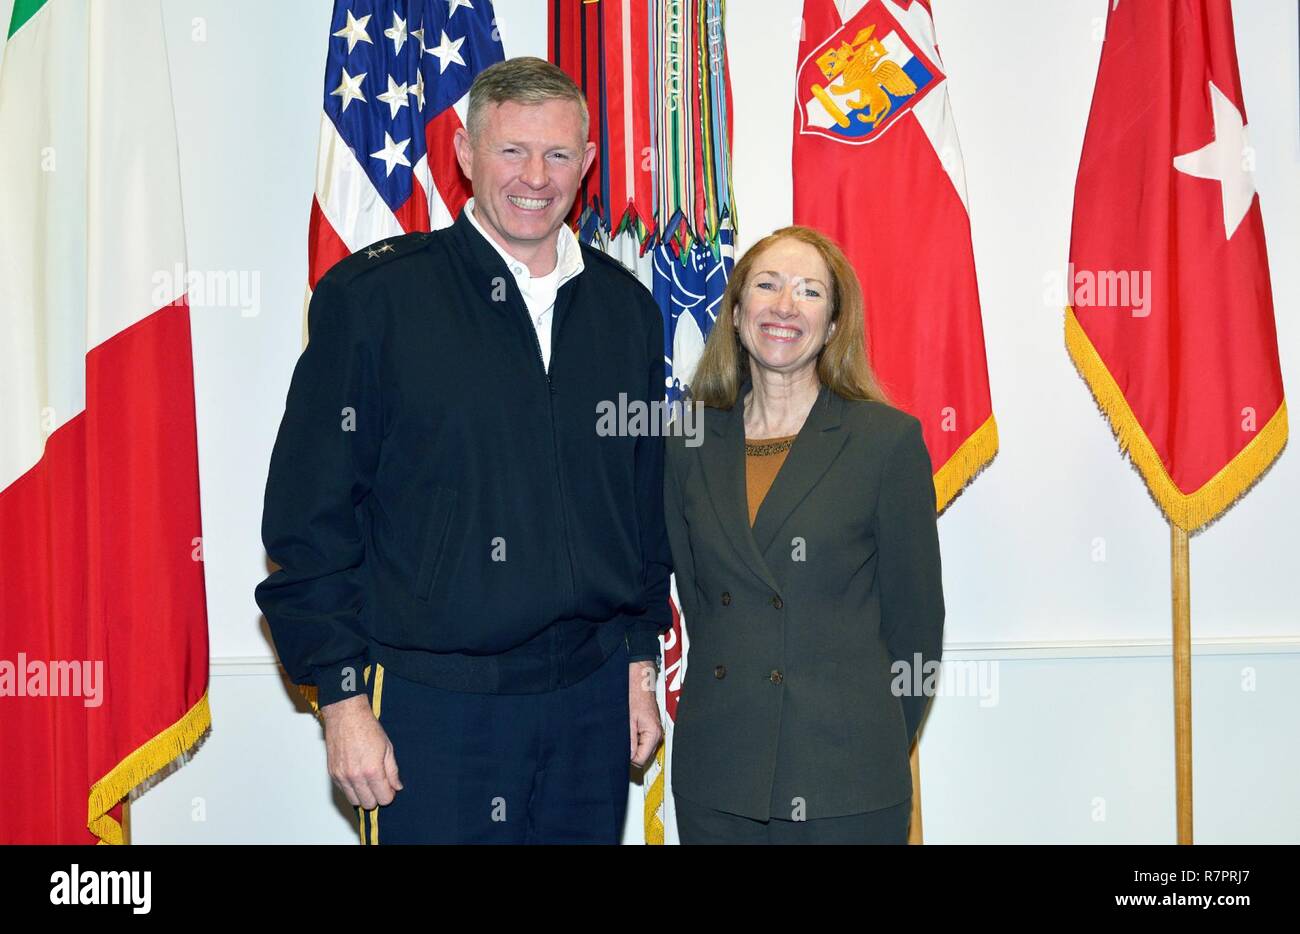 From left, Maj. Gen. Joseph P. Harrington, U.S. Army Africa Commanding General, Hon. Kelly Degnan, charge’ d’Affaires ad interim U.S. Embassy & Consulates Italy, pose for a photo in the USARAF Commander's office at Caserma Ederle in Vicenza, Italy, March 29, 2017. Stock Photo